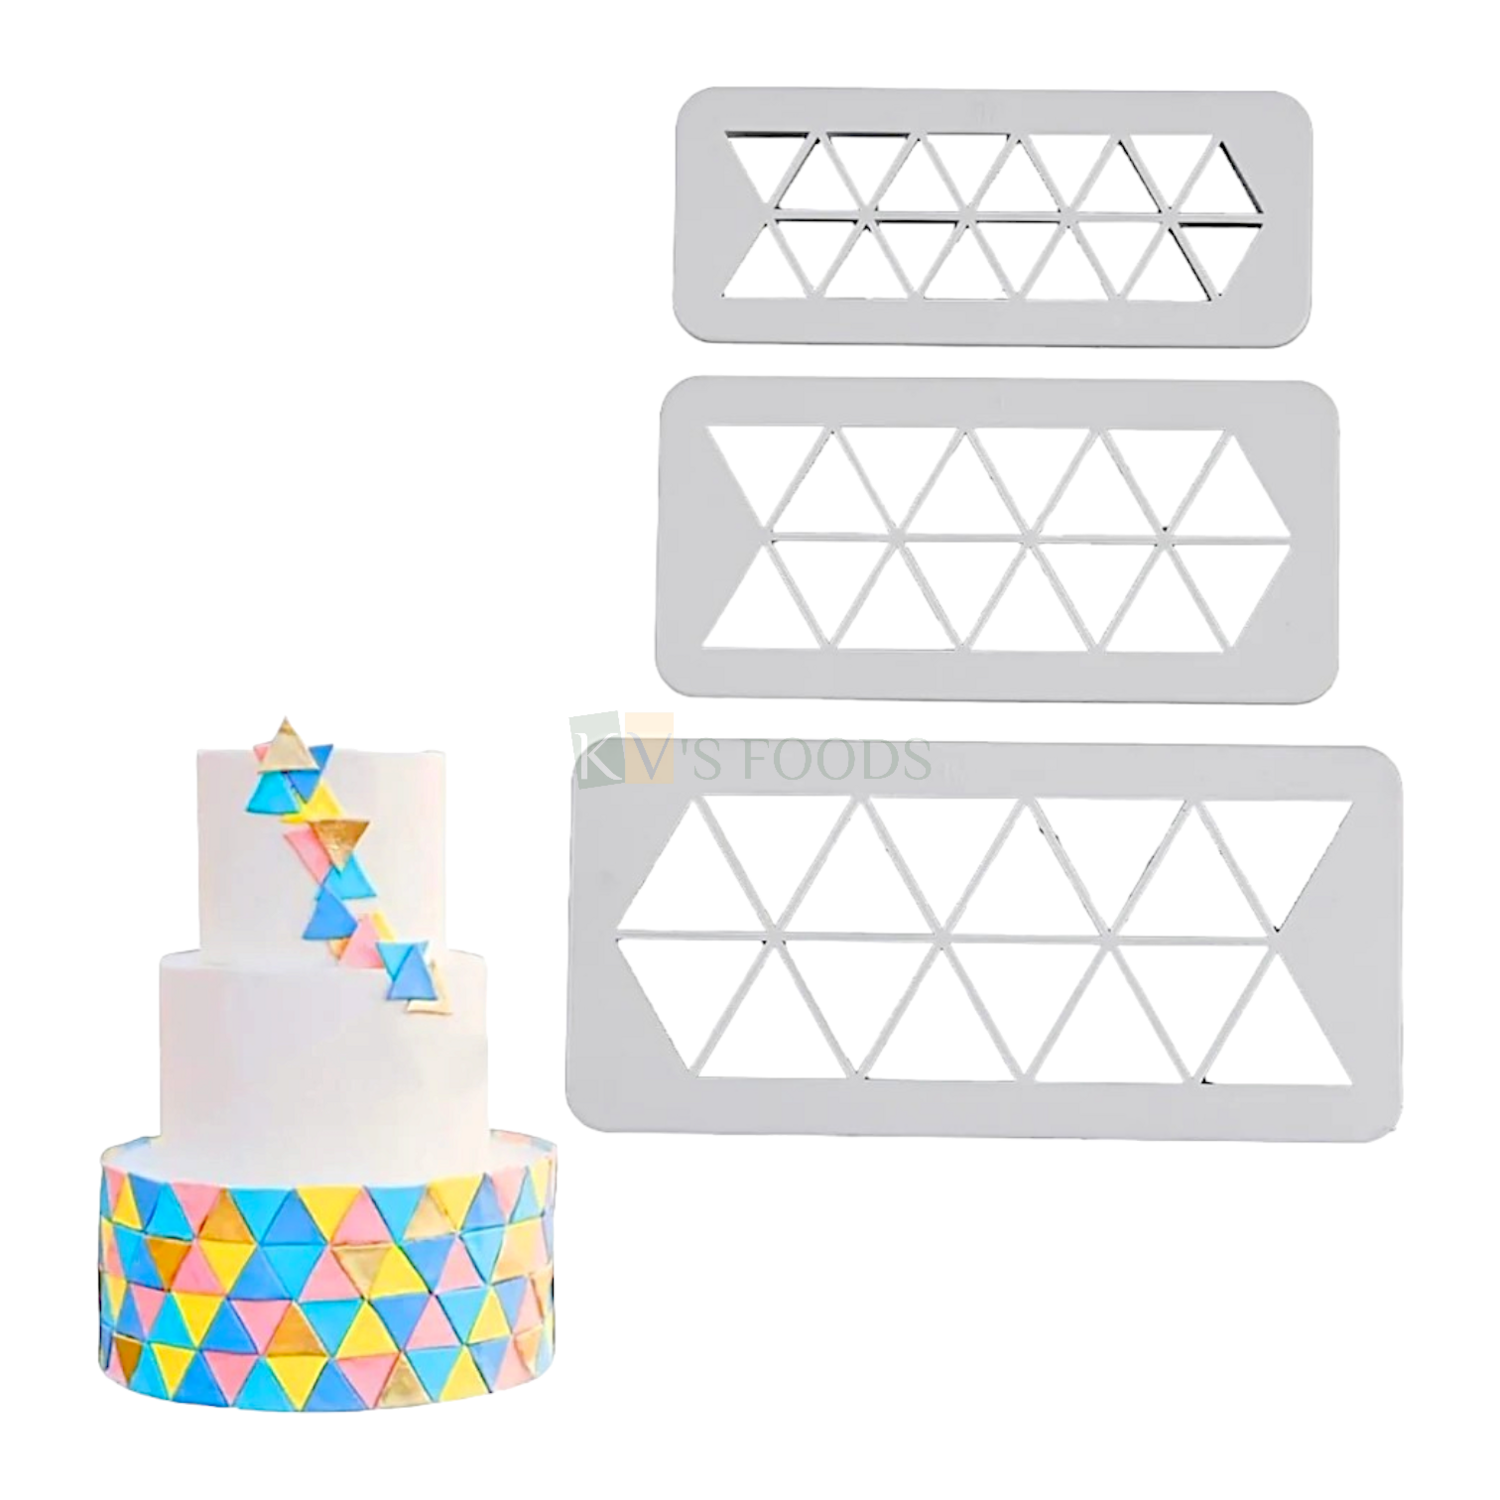 3 PCS Triangle Cookie Fondant Cutter & Embosser, Small, Medium & Large Size Geometric Cutter Set, Equilateral Triangle for Cake Design Printing Mold Cakes Decorations, Wedding Anniversary Theme